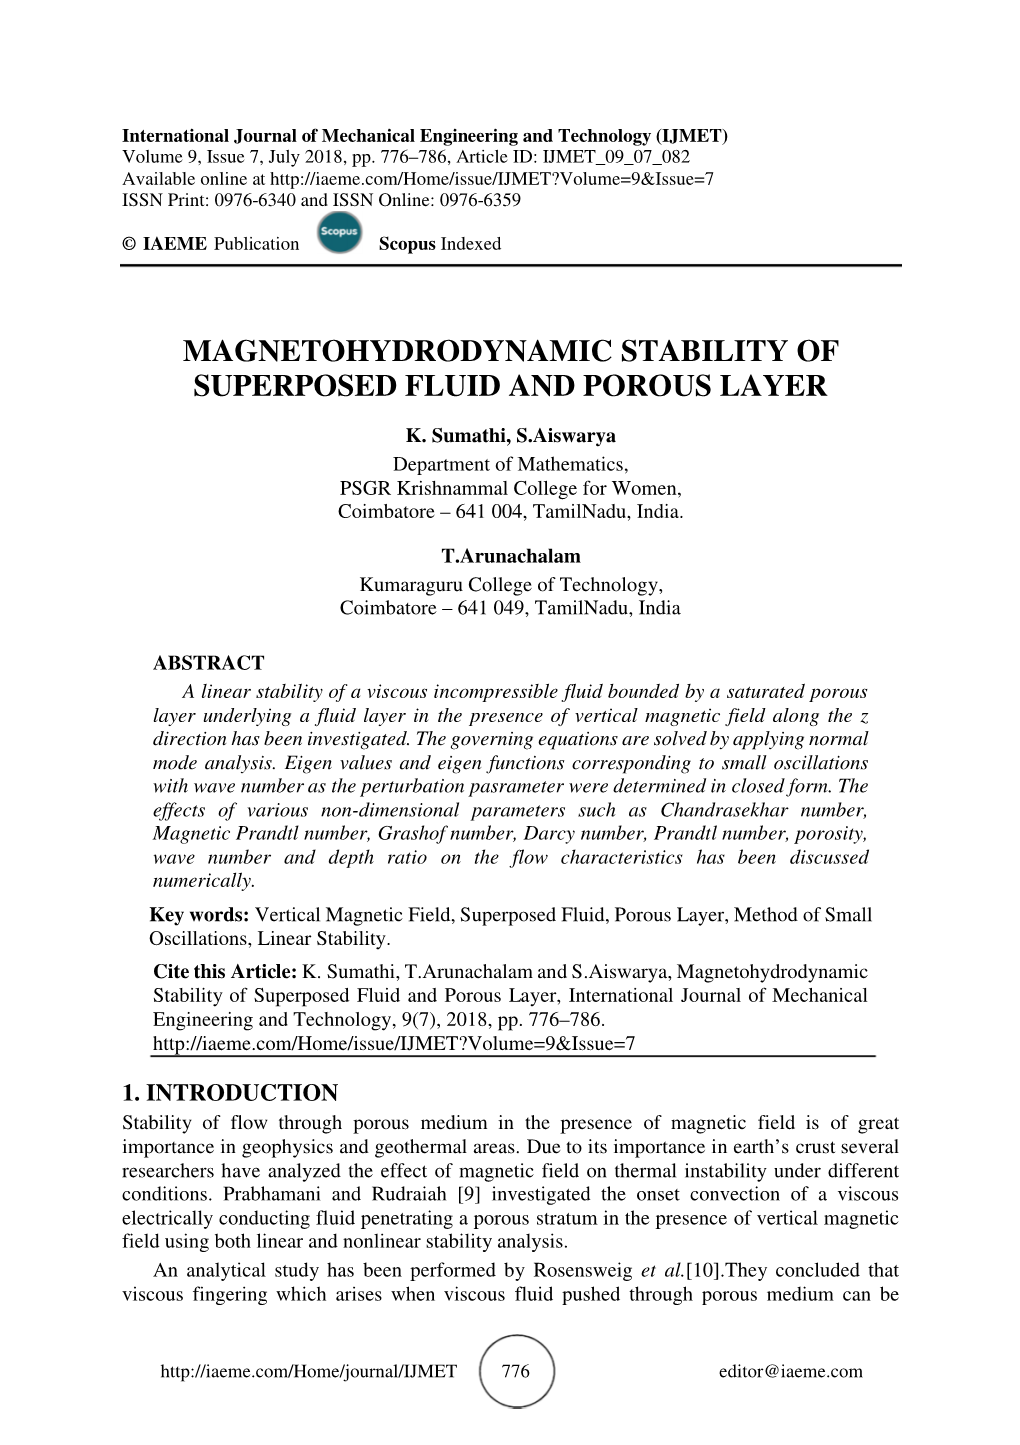 Magnetohydrodynamic Stability of Superposed Fluid and Porous Layer